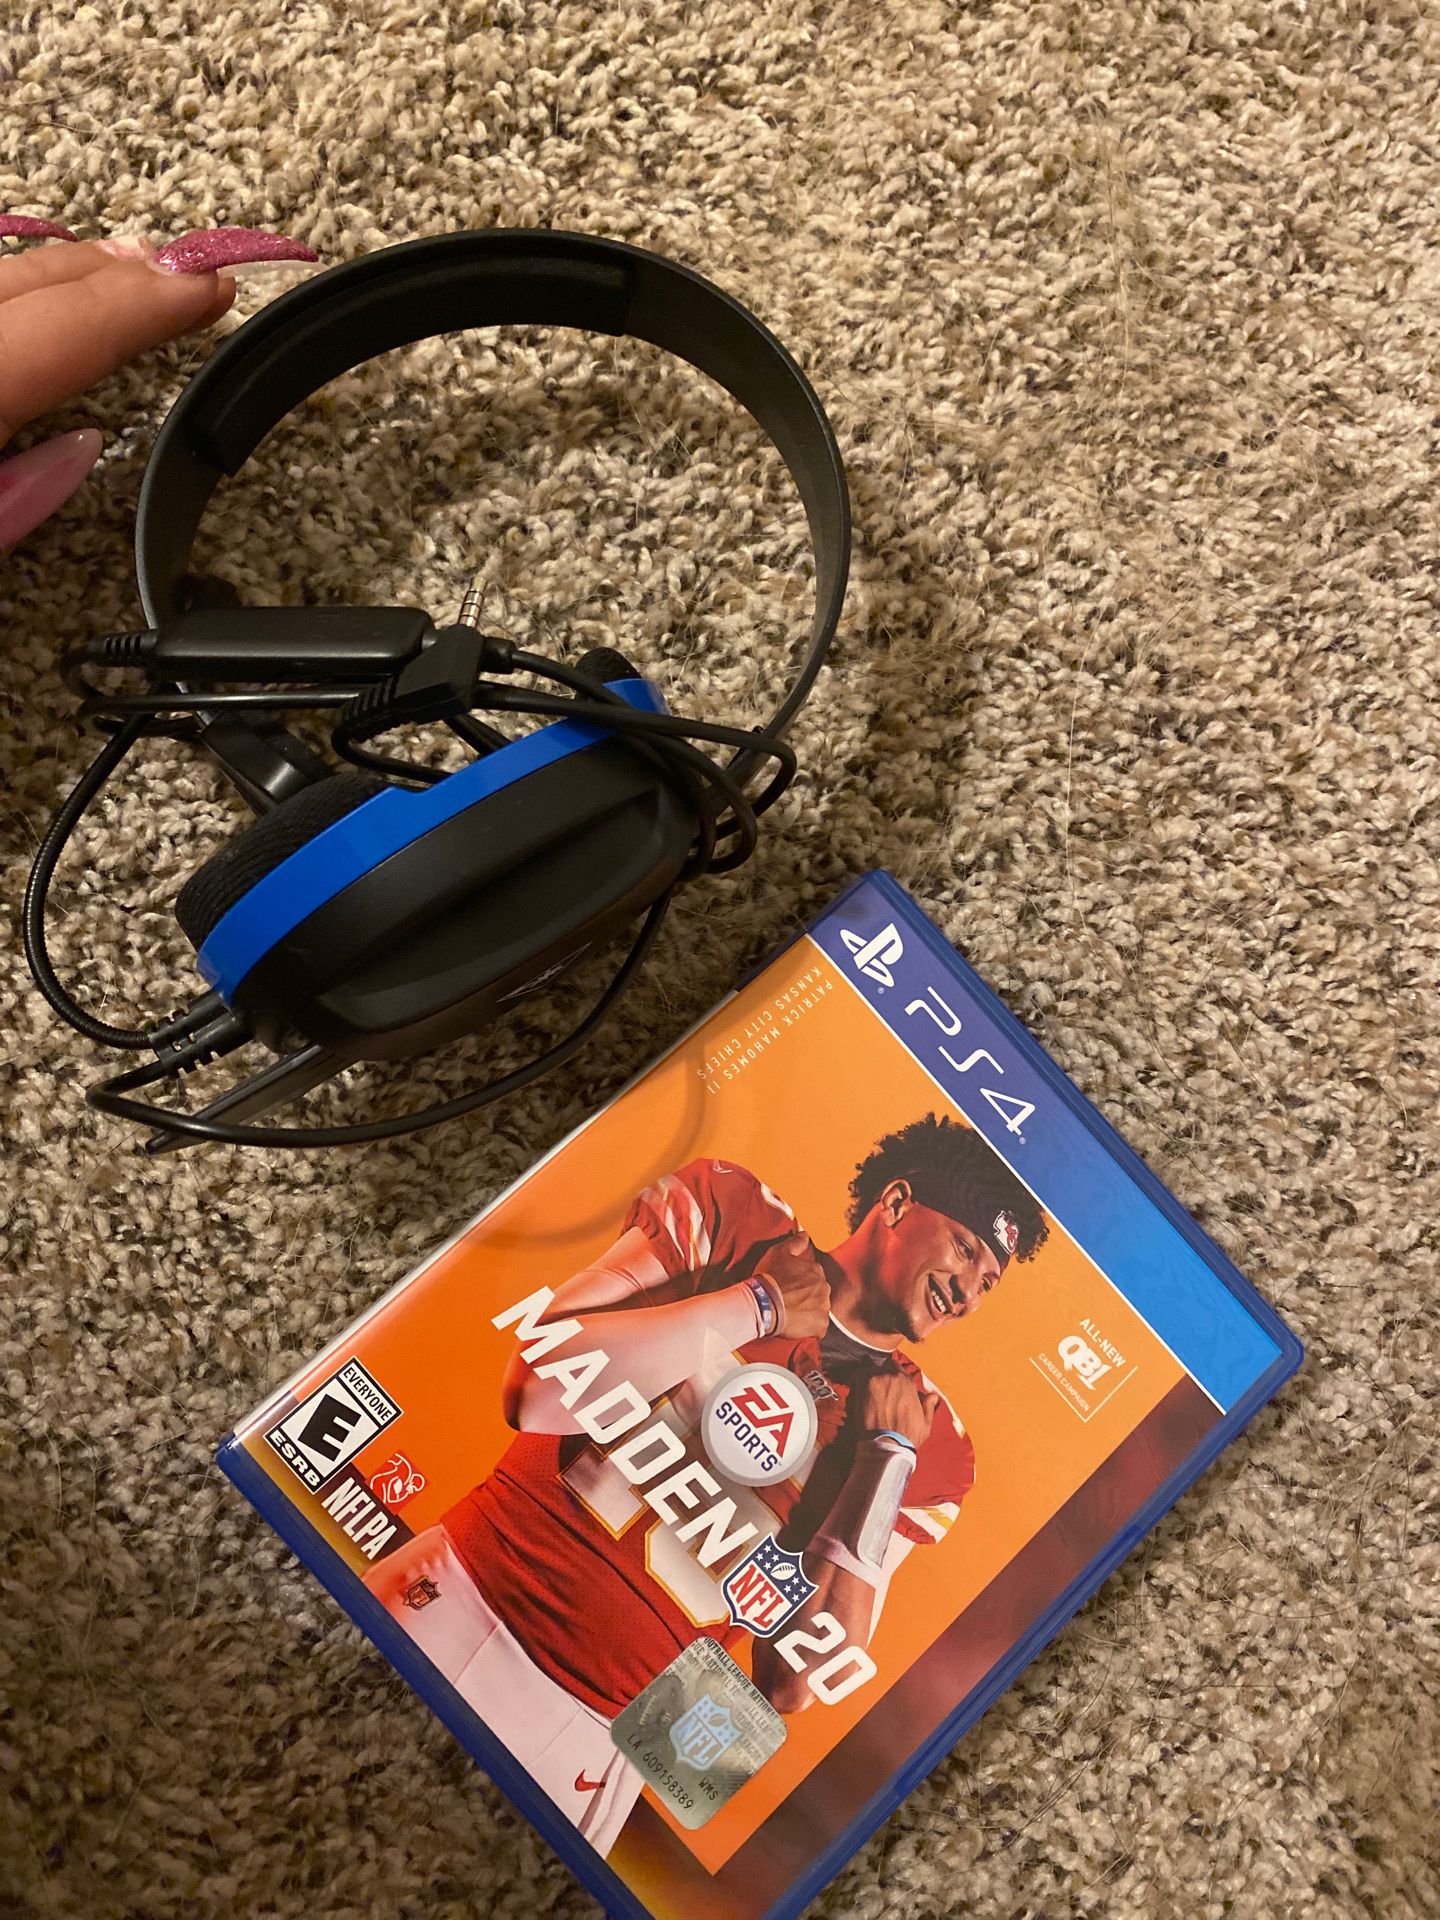 PS4 headphones and madden 20